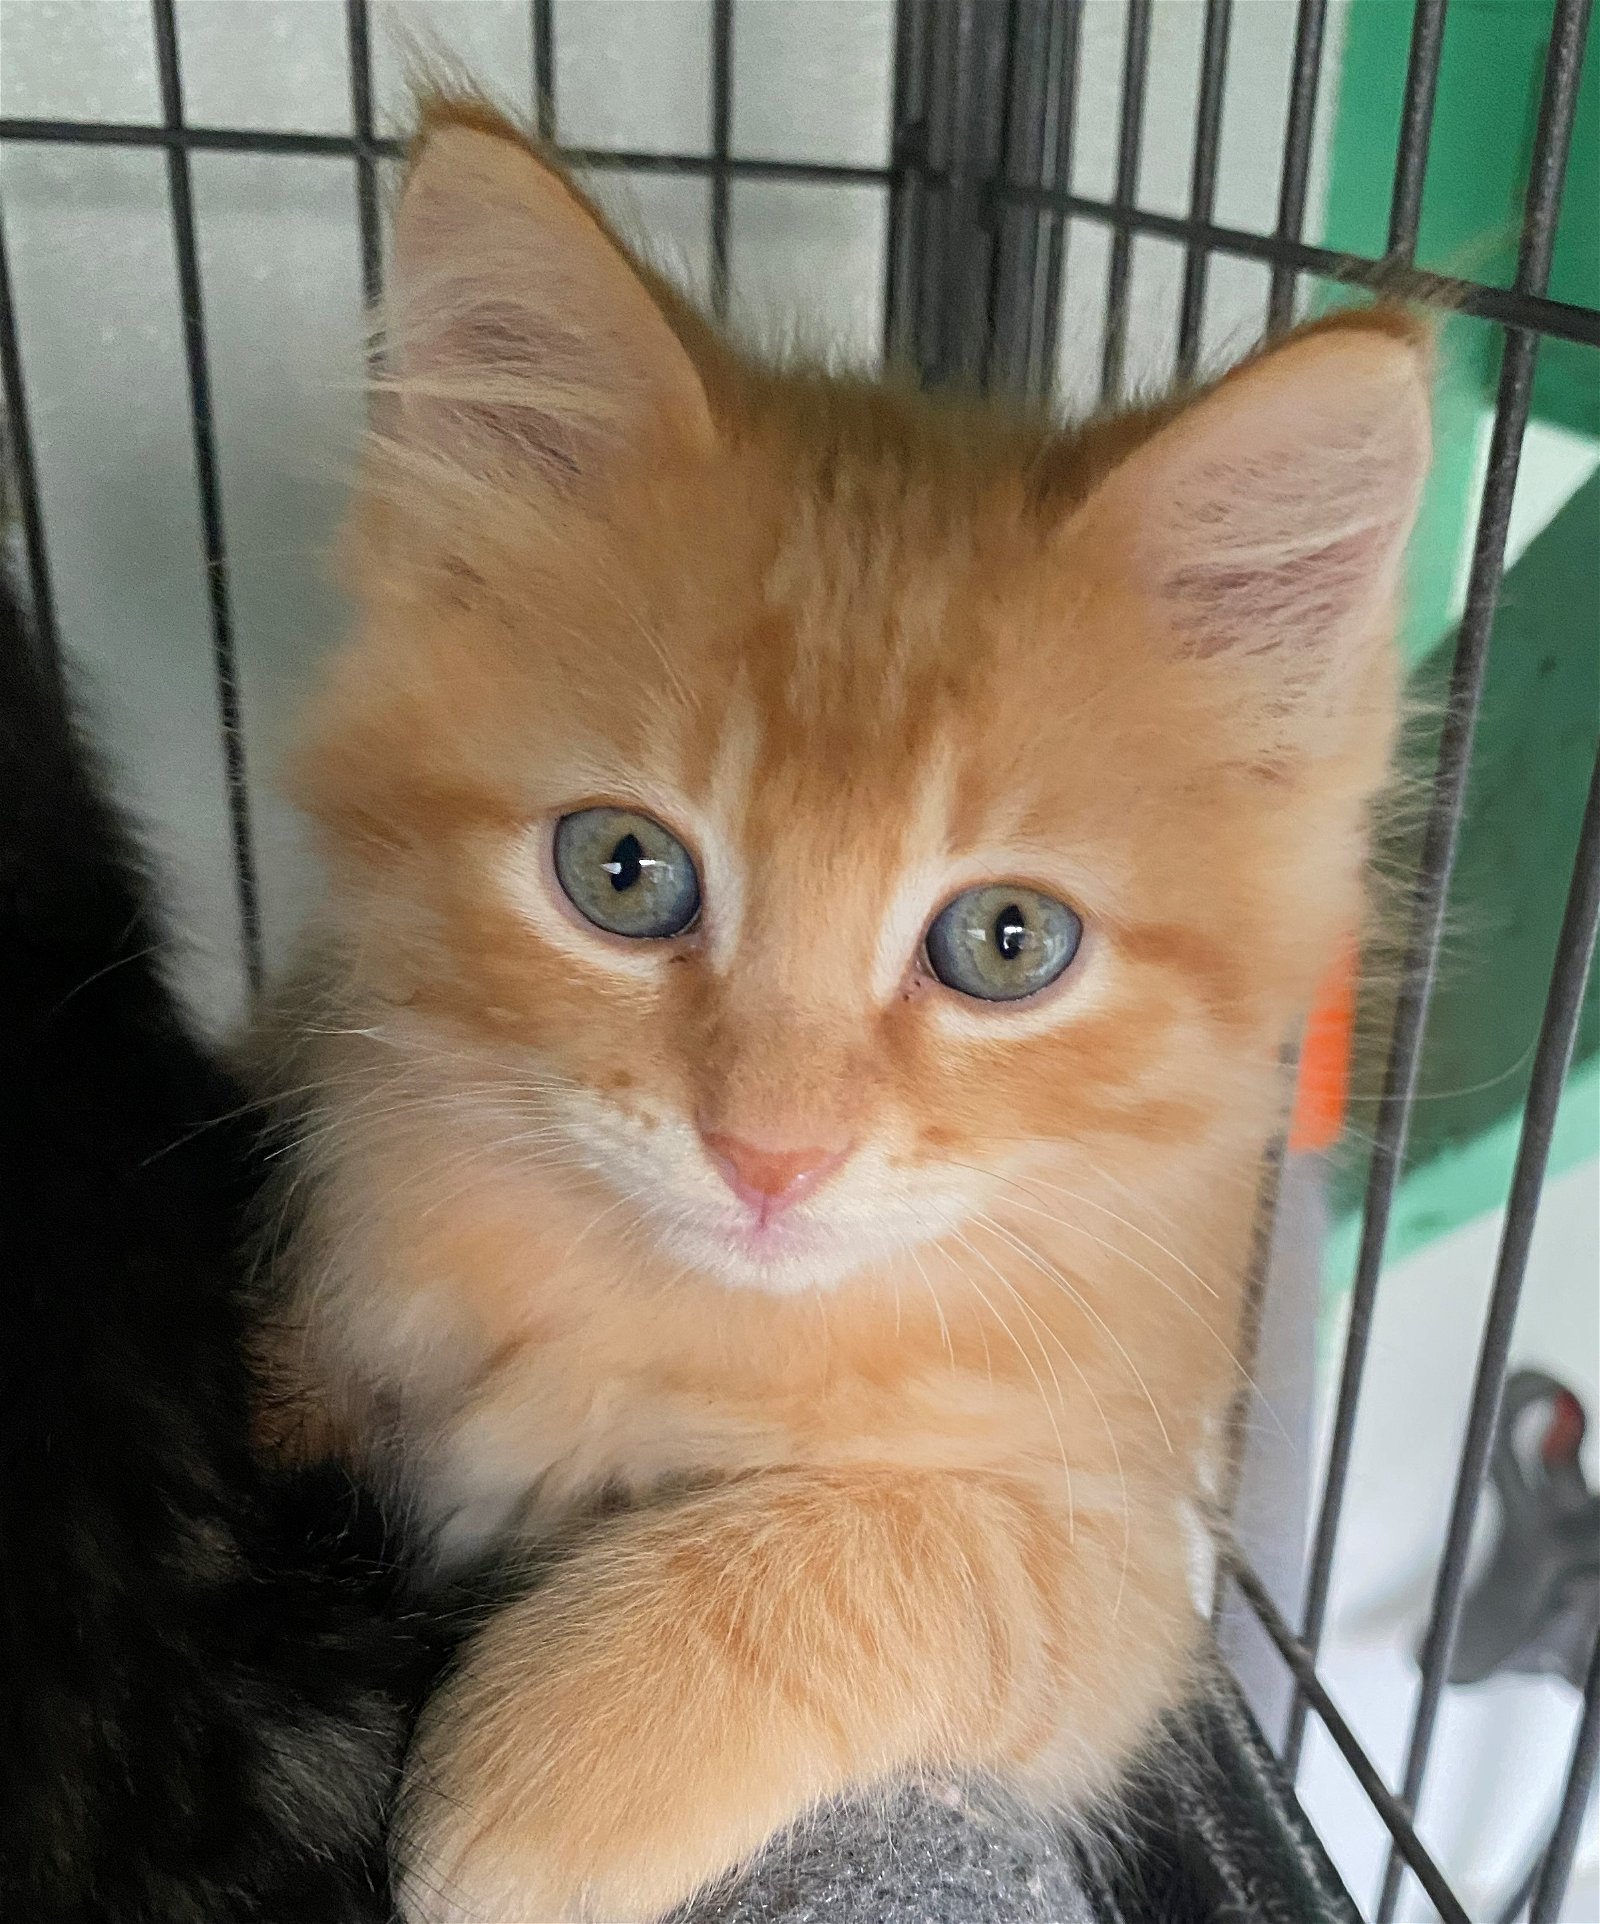 SHERBET • Adopted • Domestic Medium Hair, Orange and White Male Cat |  Humane Society of Dallas County